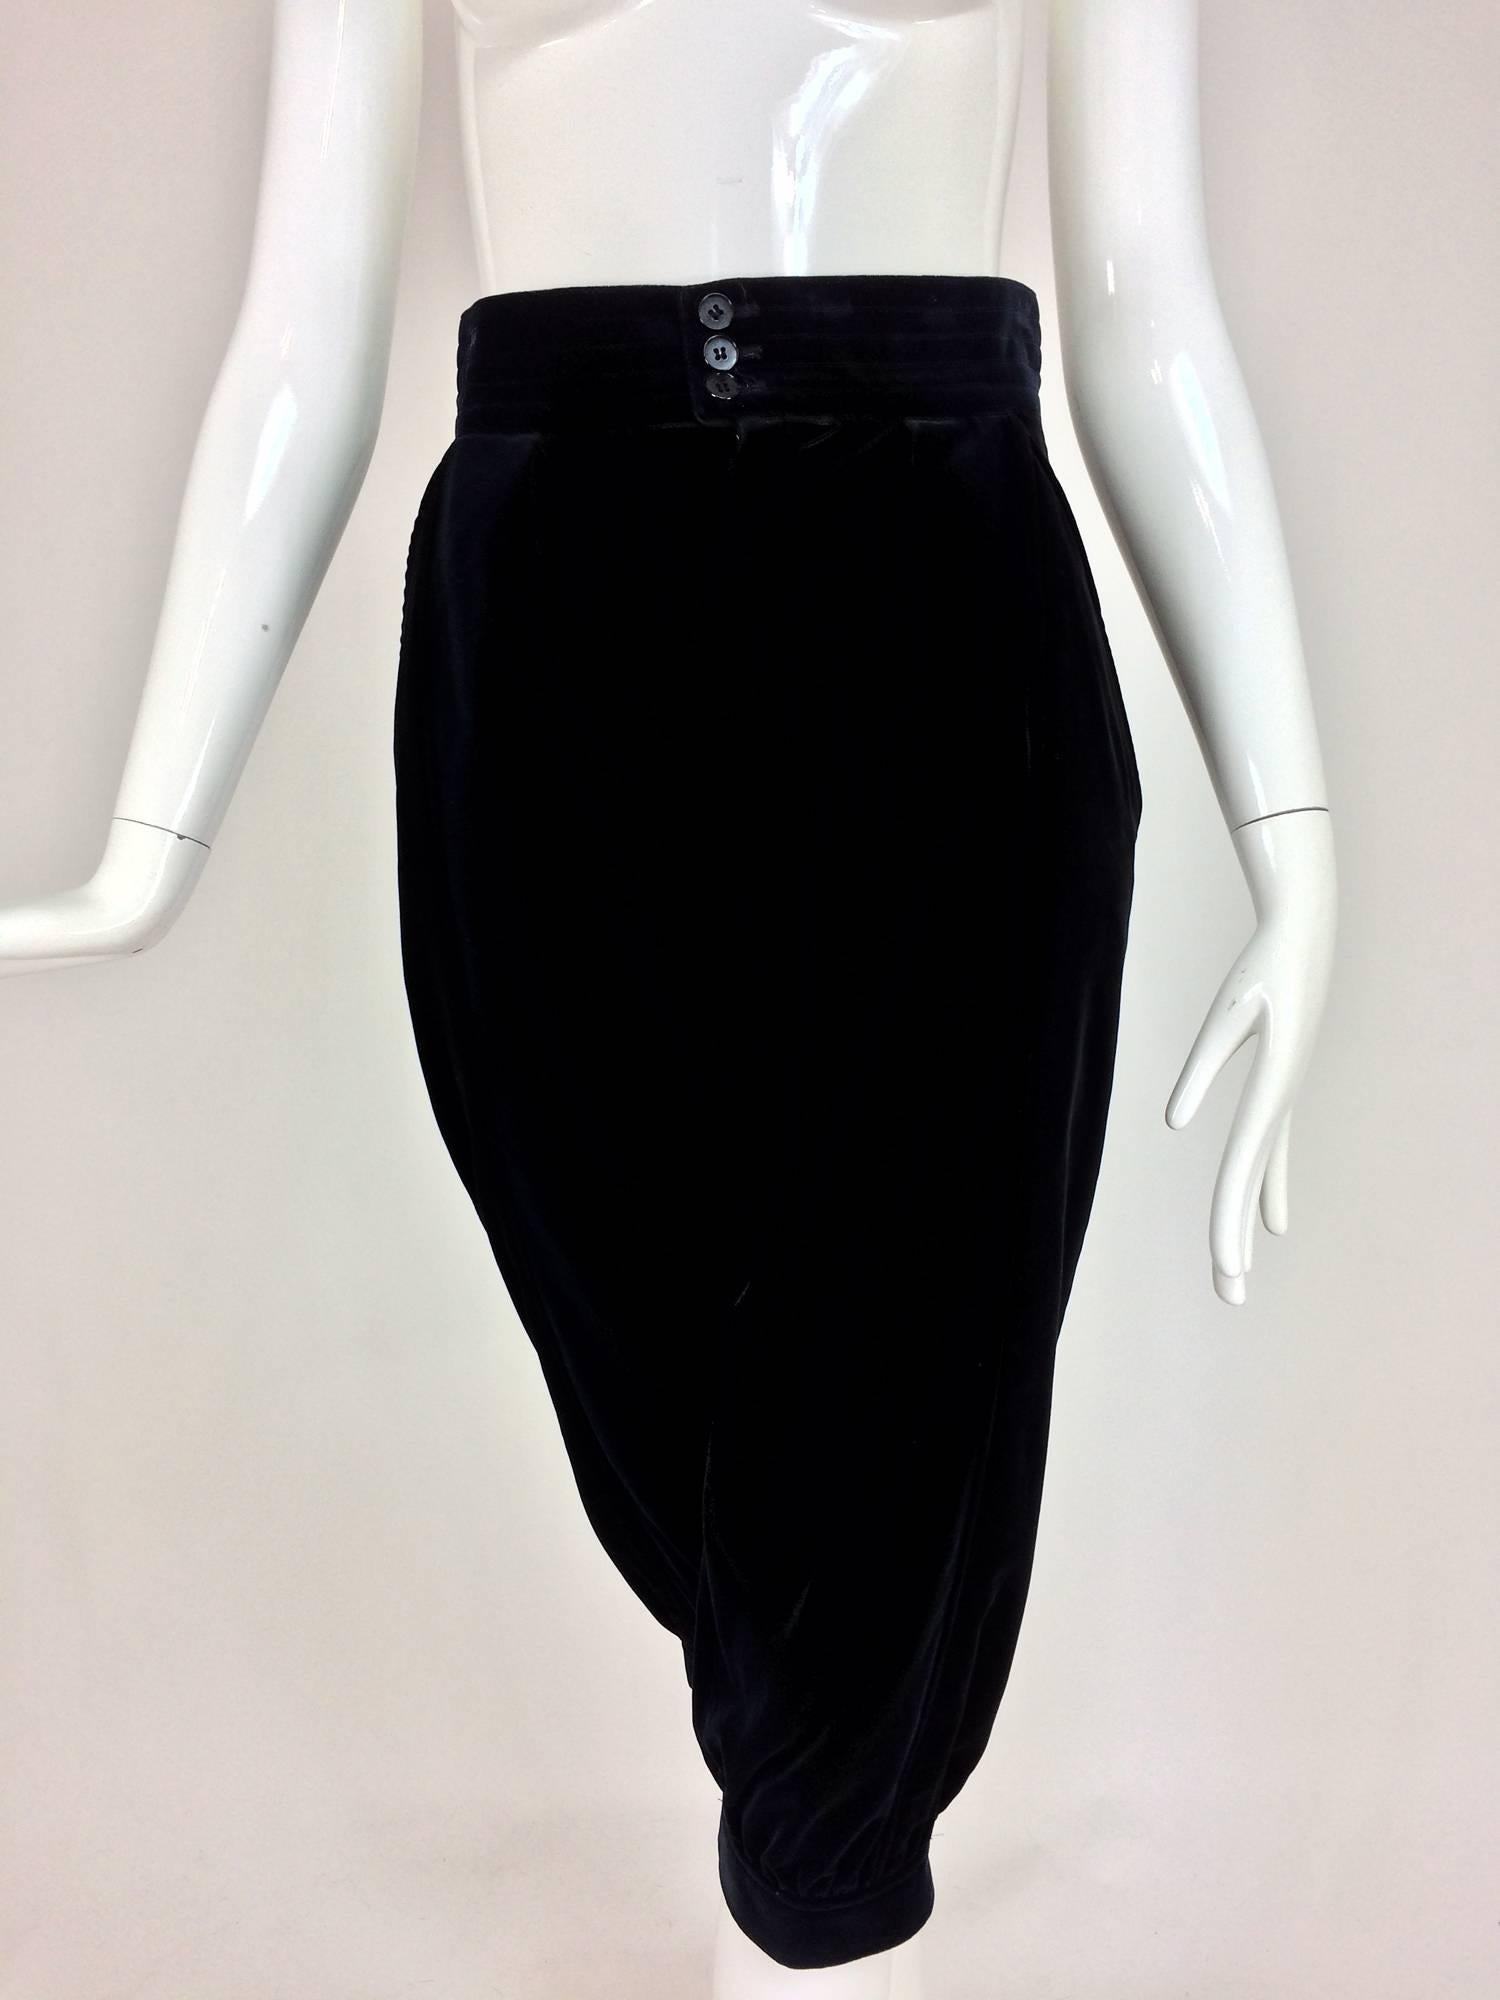 Yves St Laurent navy & black velvet knickers 1970s. Cotton velvet knee length trouser with a wide high waist band that closes with double buttons. The trousers are fitted at the back, the front has curved hip front pockets and a bit of gathering,